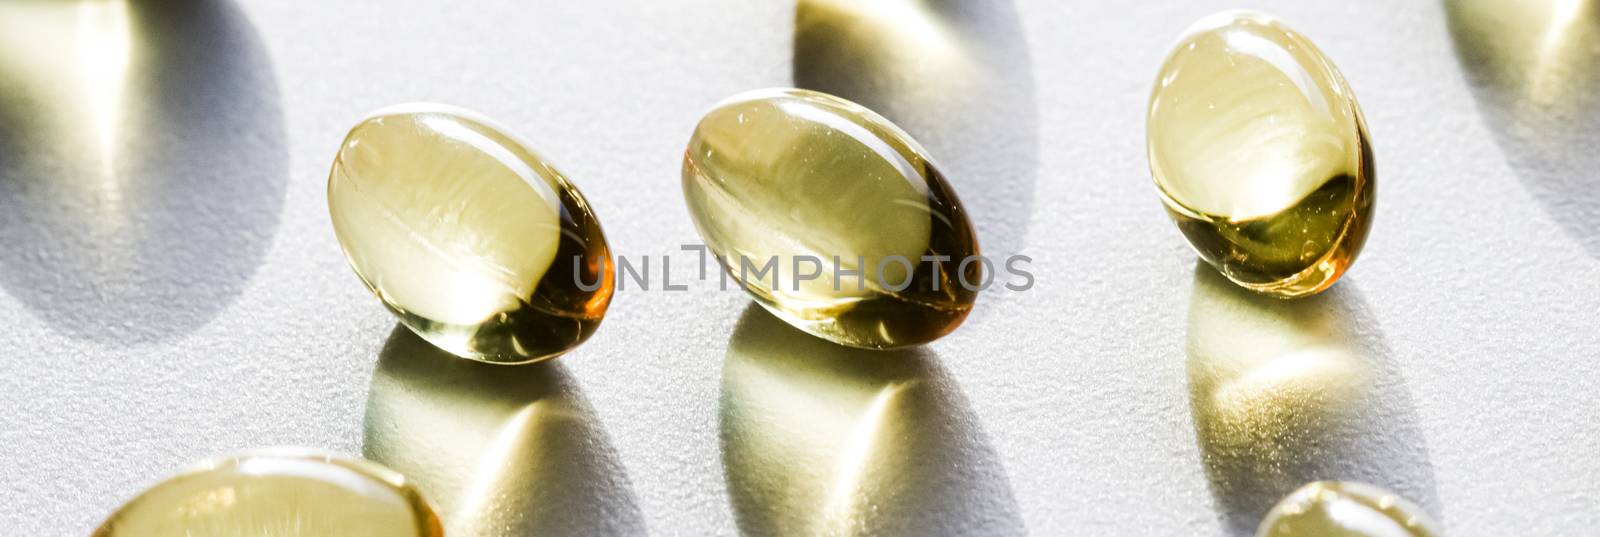 Omega 3 fish oil capsules for healthy diet nutrition, pharma bra by Anneleven